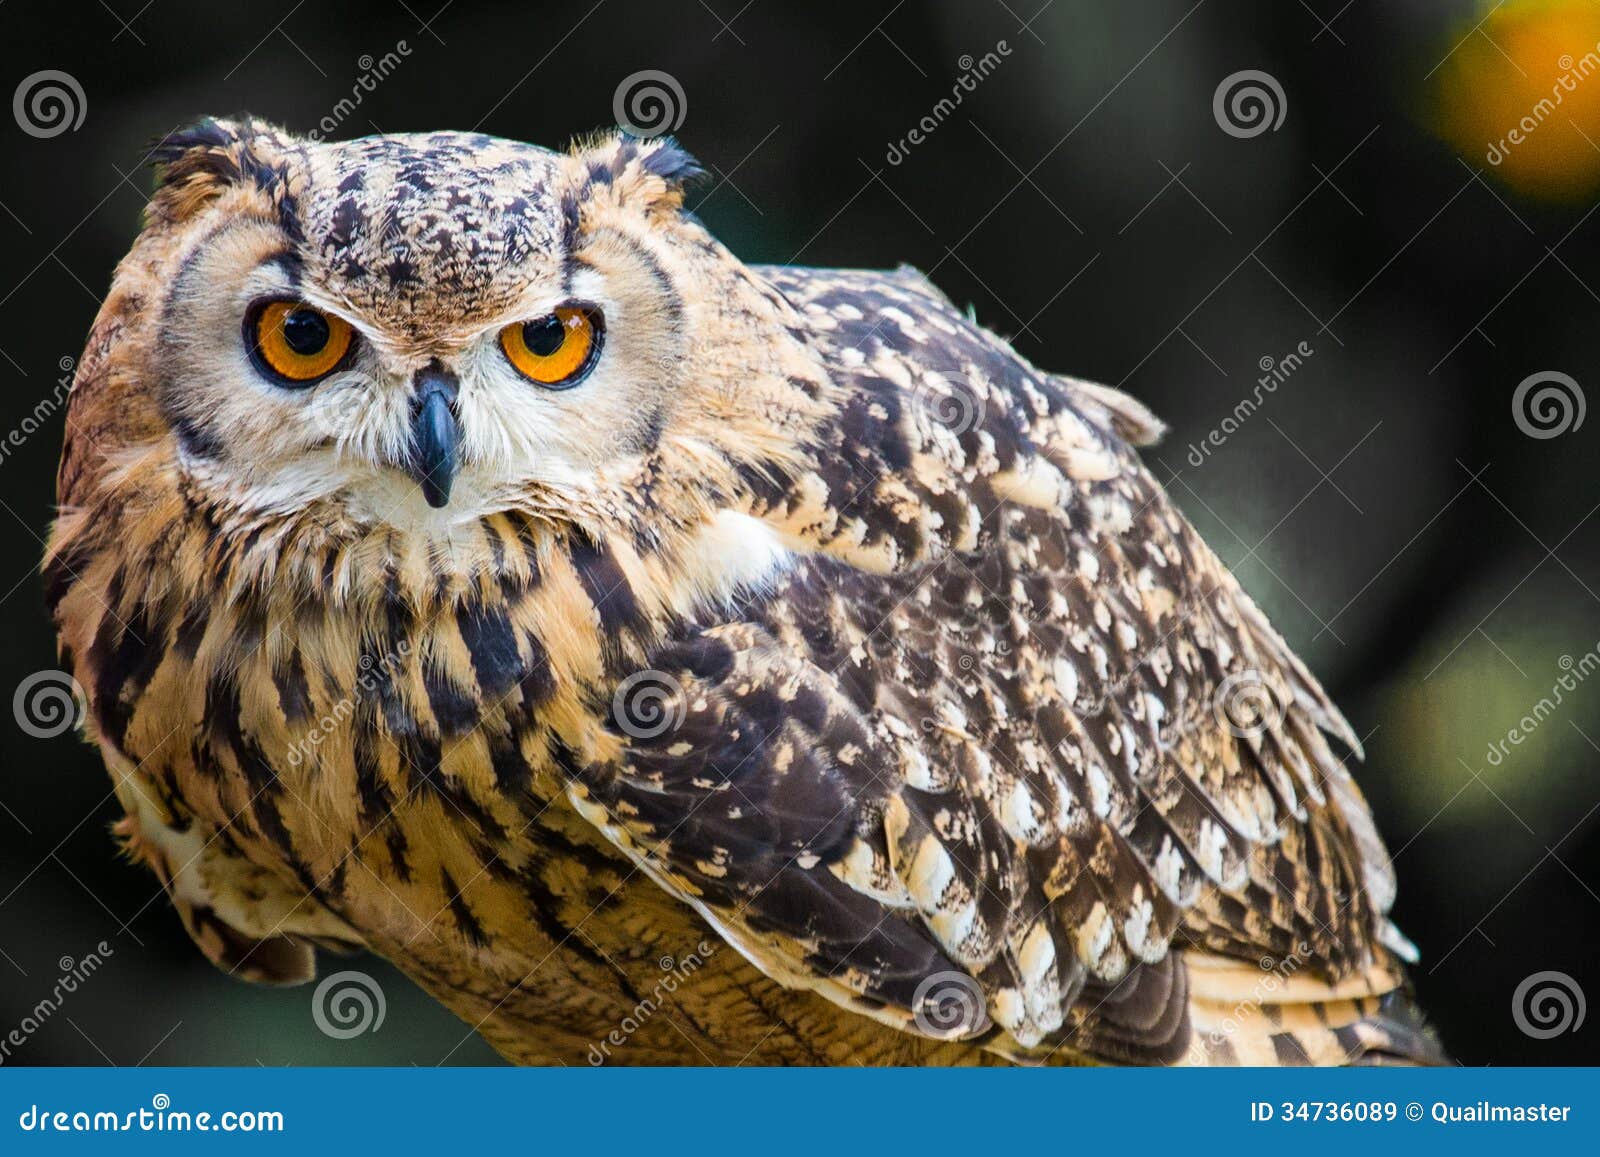 Owl stock image. Image of pets, animals, prowling, stalking - 34736089